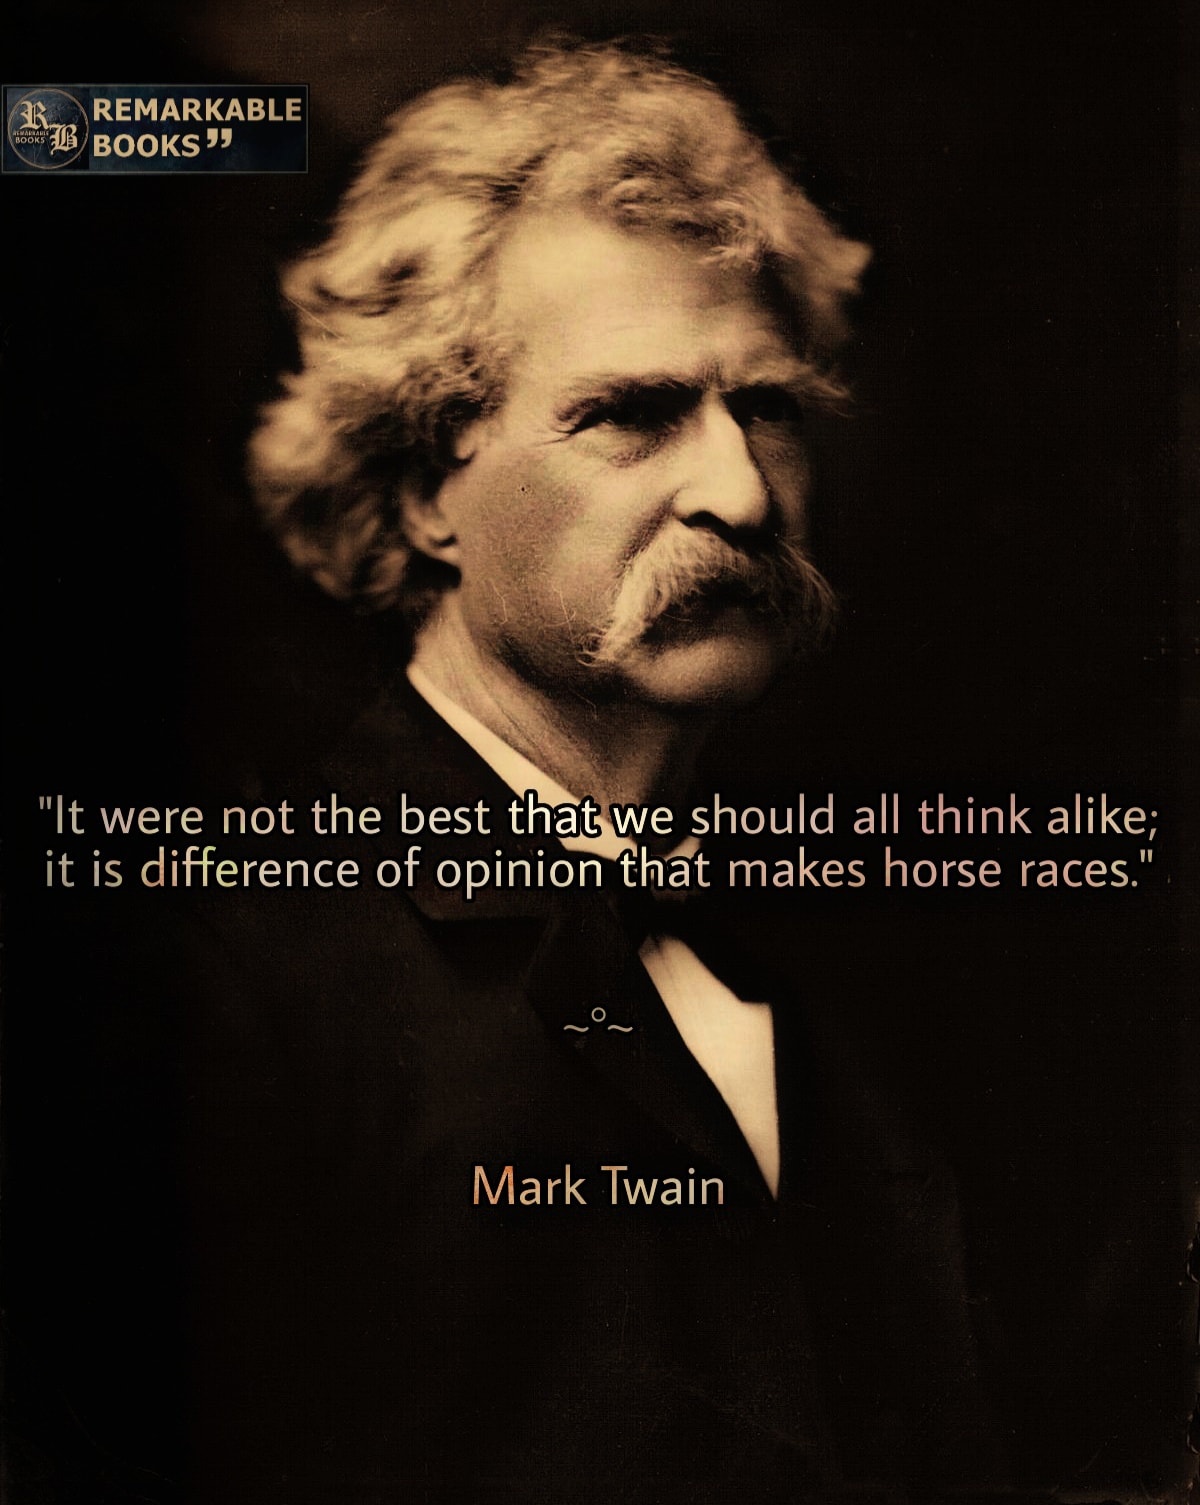 It were not best that we should all think alike; it is difference of opinion that makes horse races.